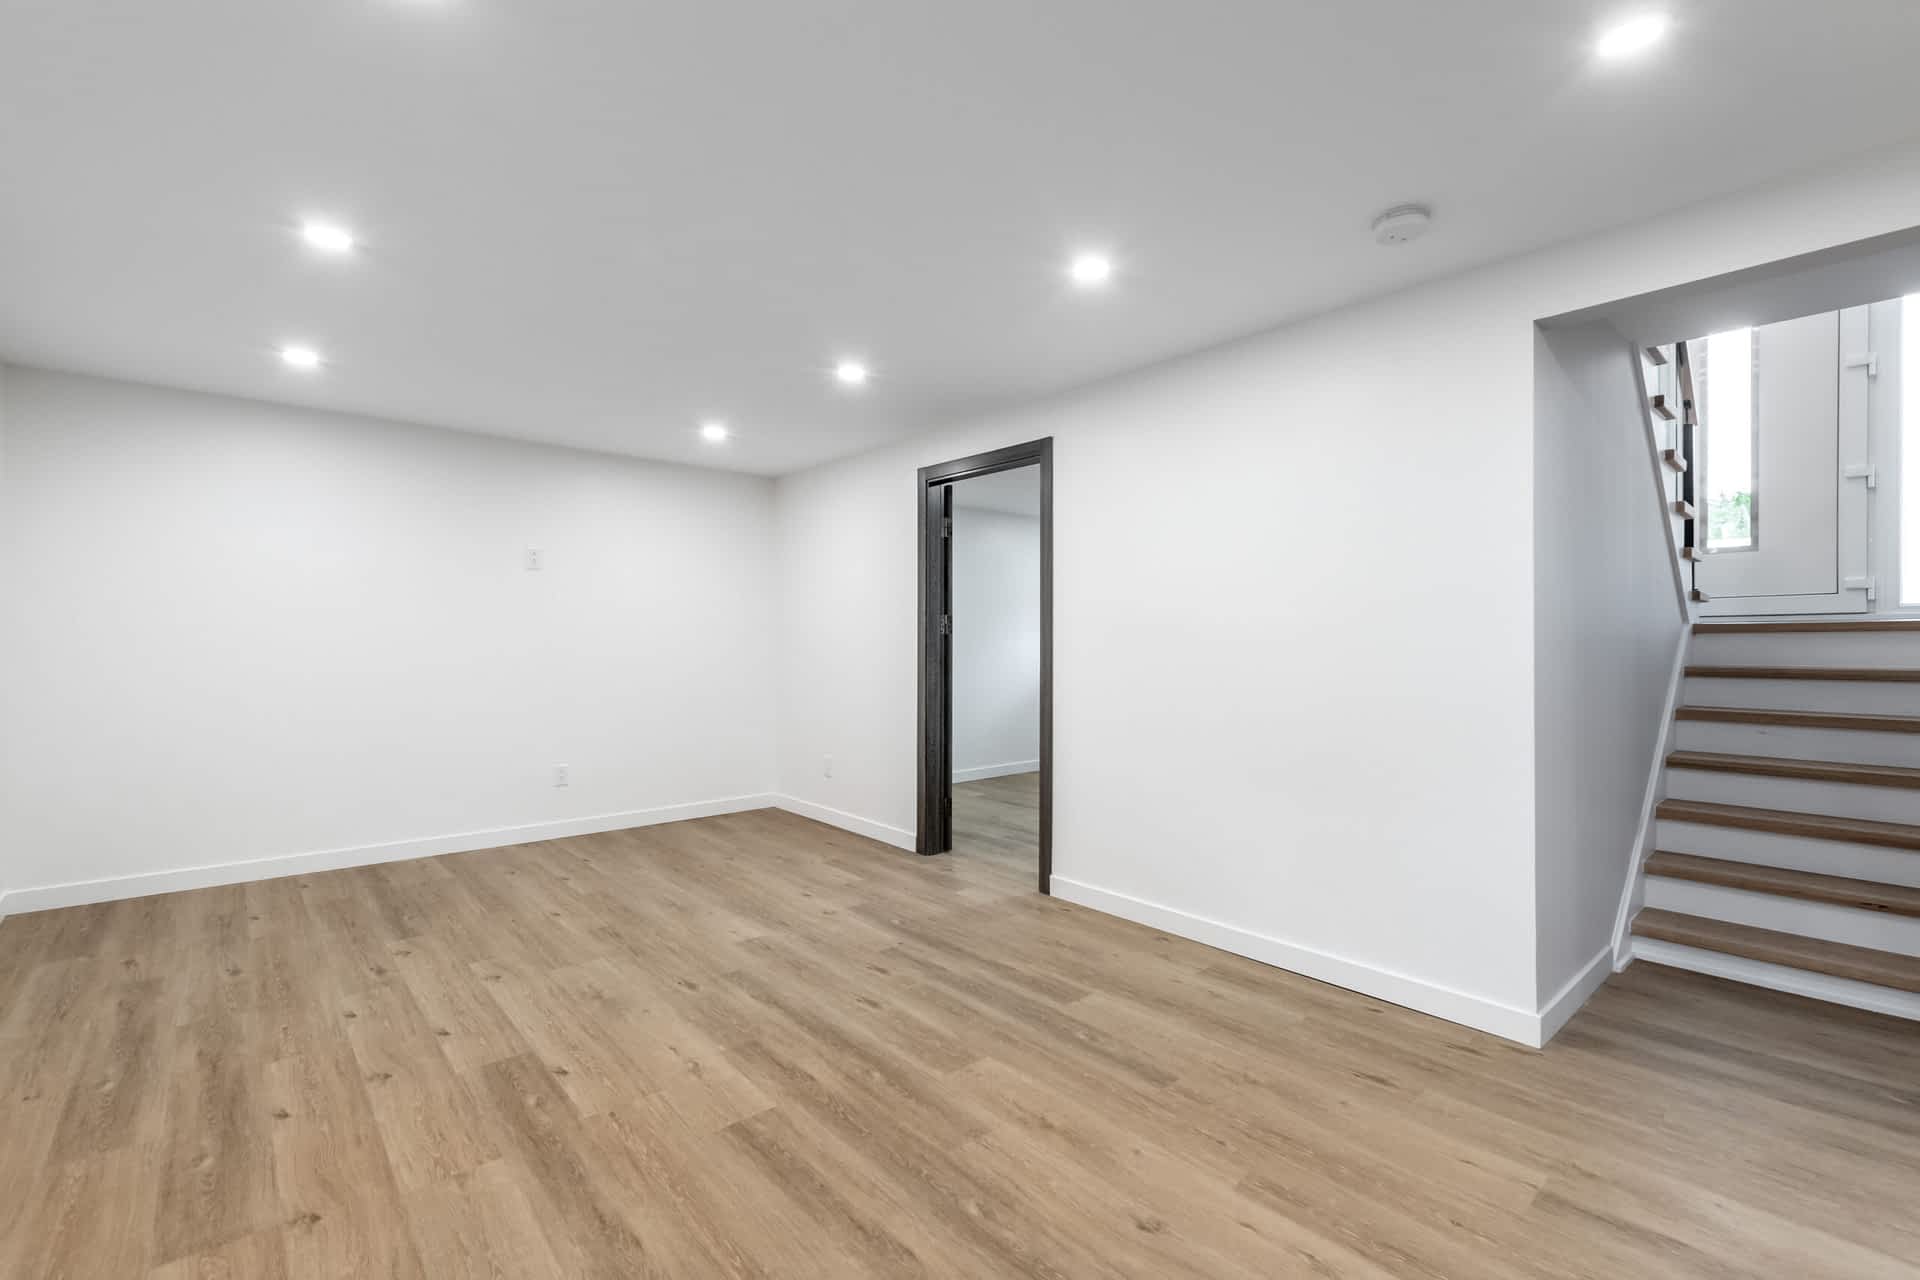 Basement Finishing and Remodeling Contractor New York - A Finished Basement Project